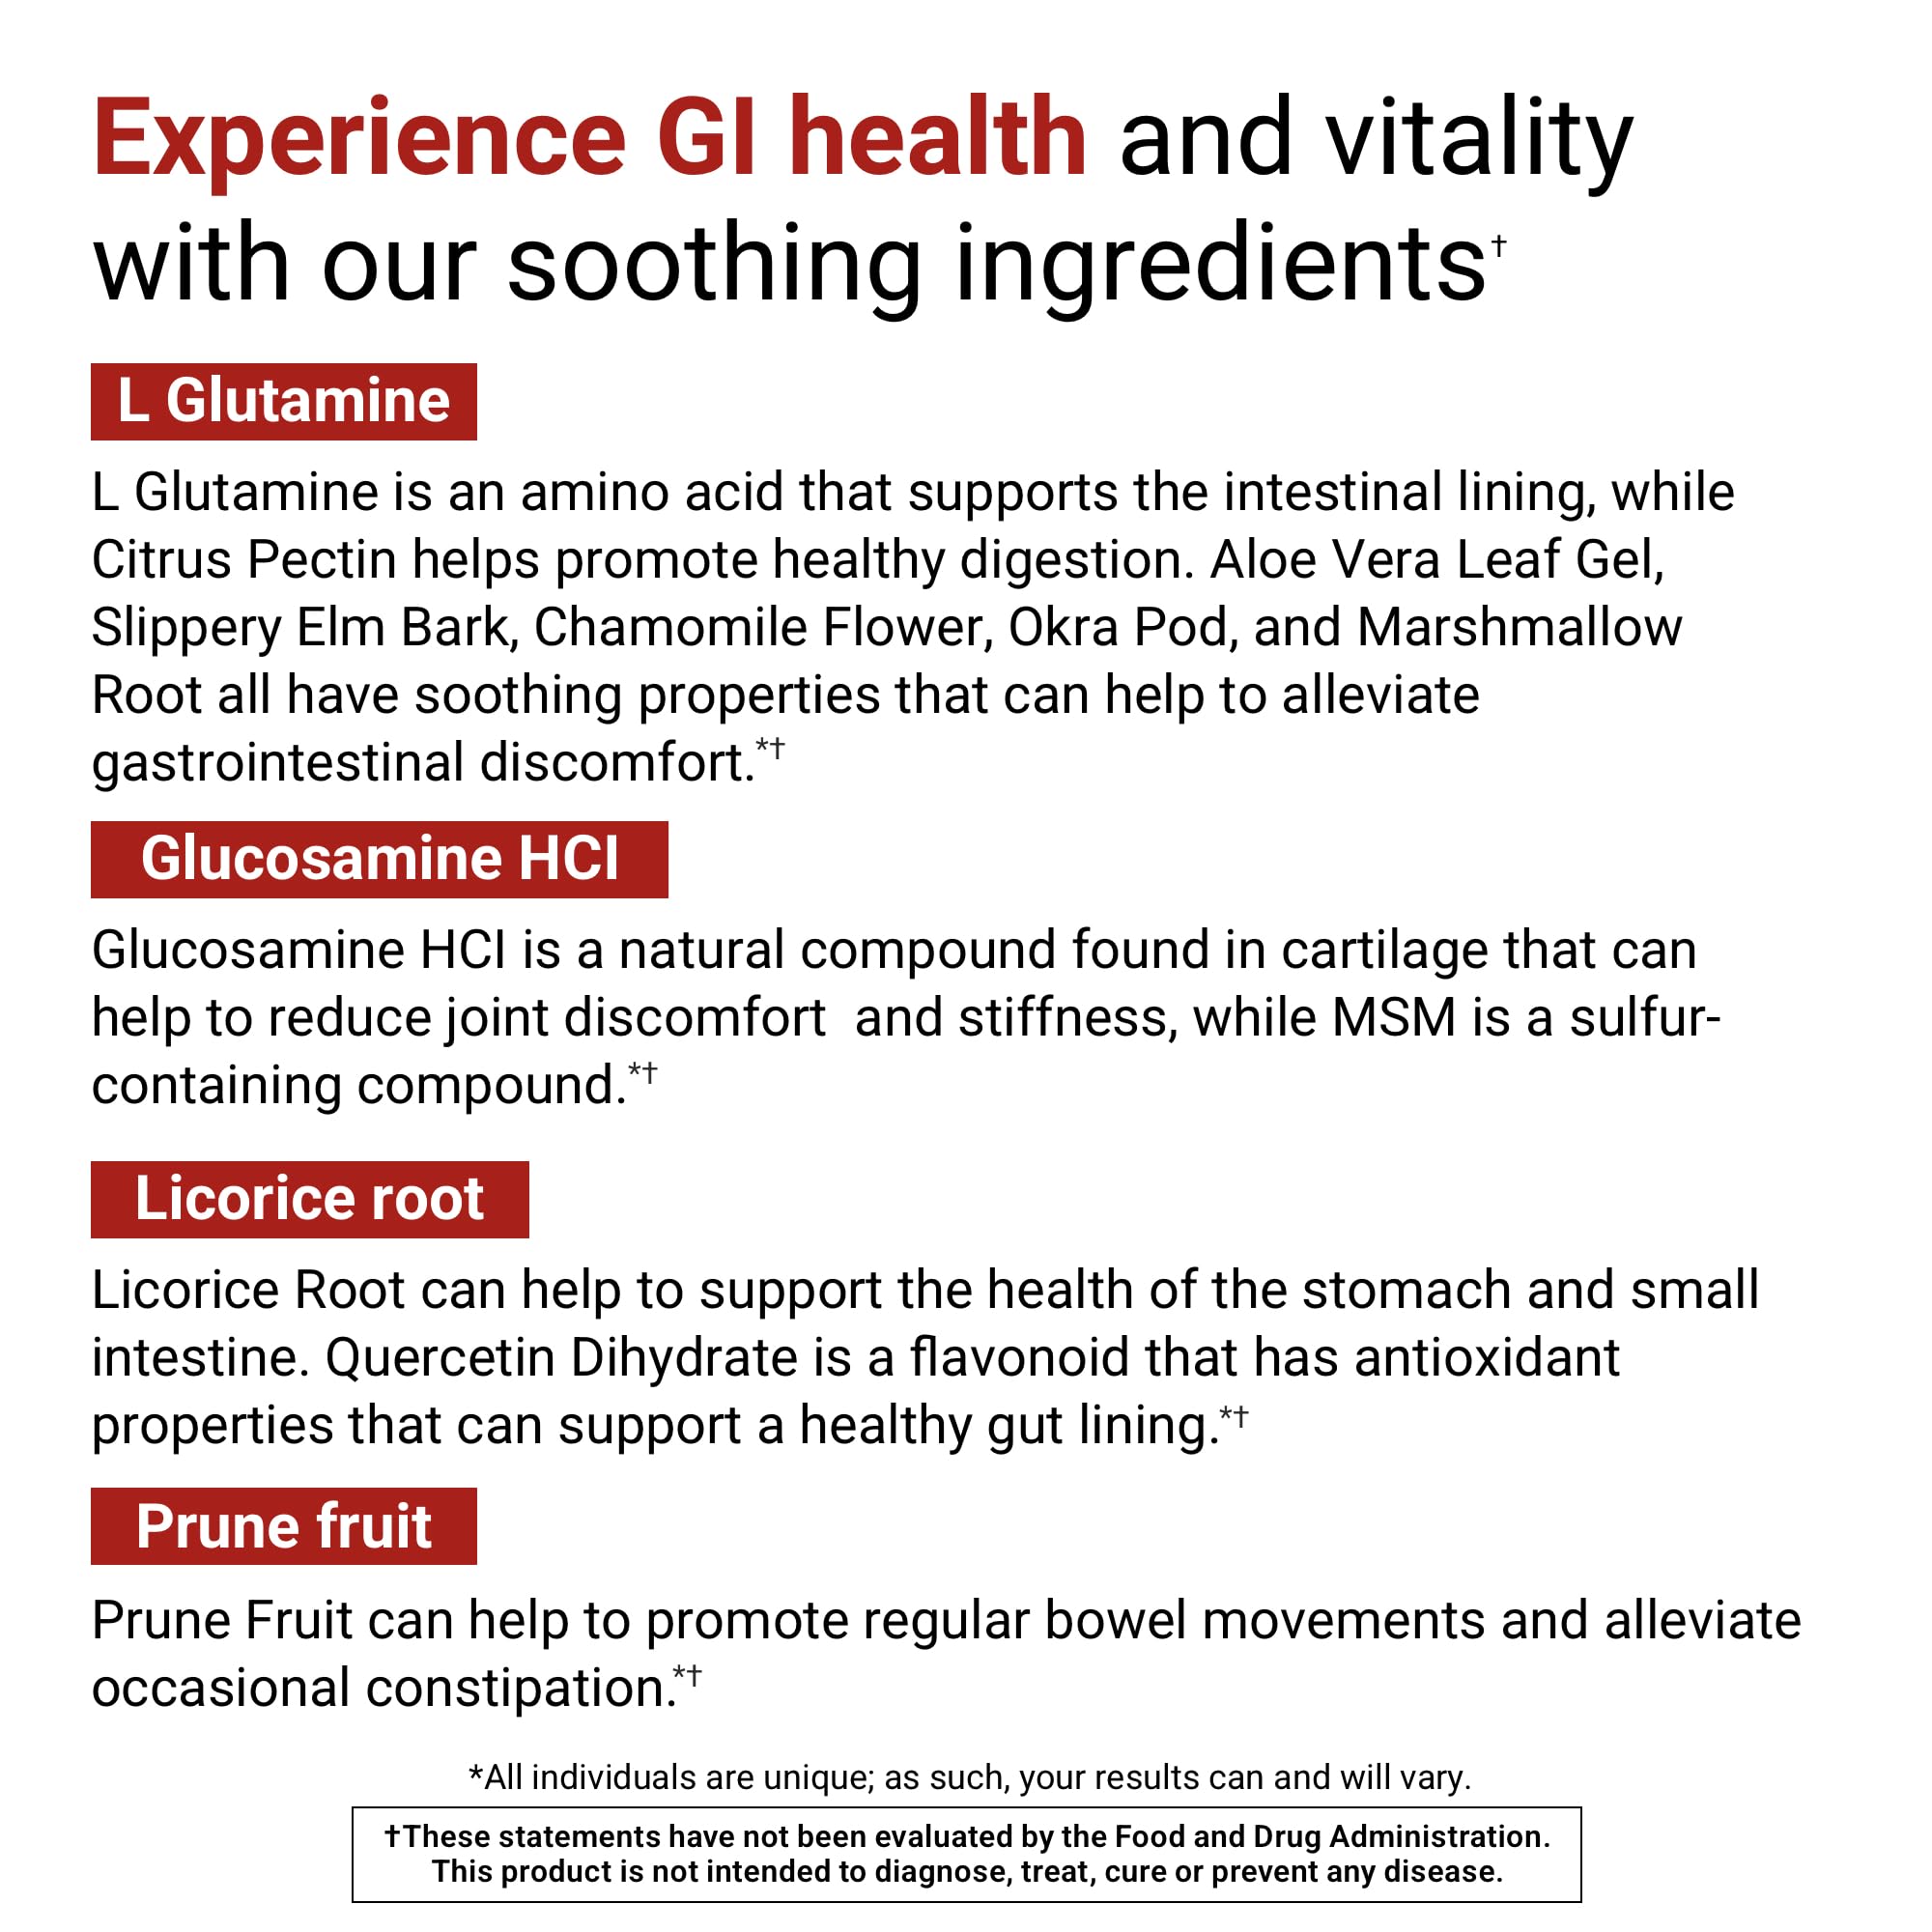 ACTIVATEDYOU GI Prime Digestive Health Drink to Support a Healthy GI Lining, Improve Digestive Comfort and Energy - Berry Calm Flavor (30 Servings)